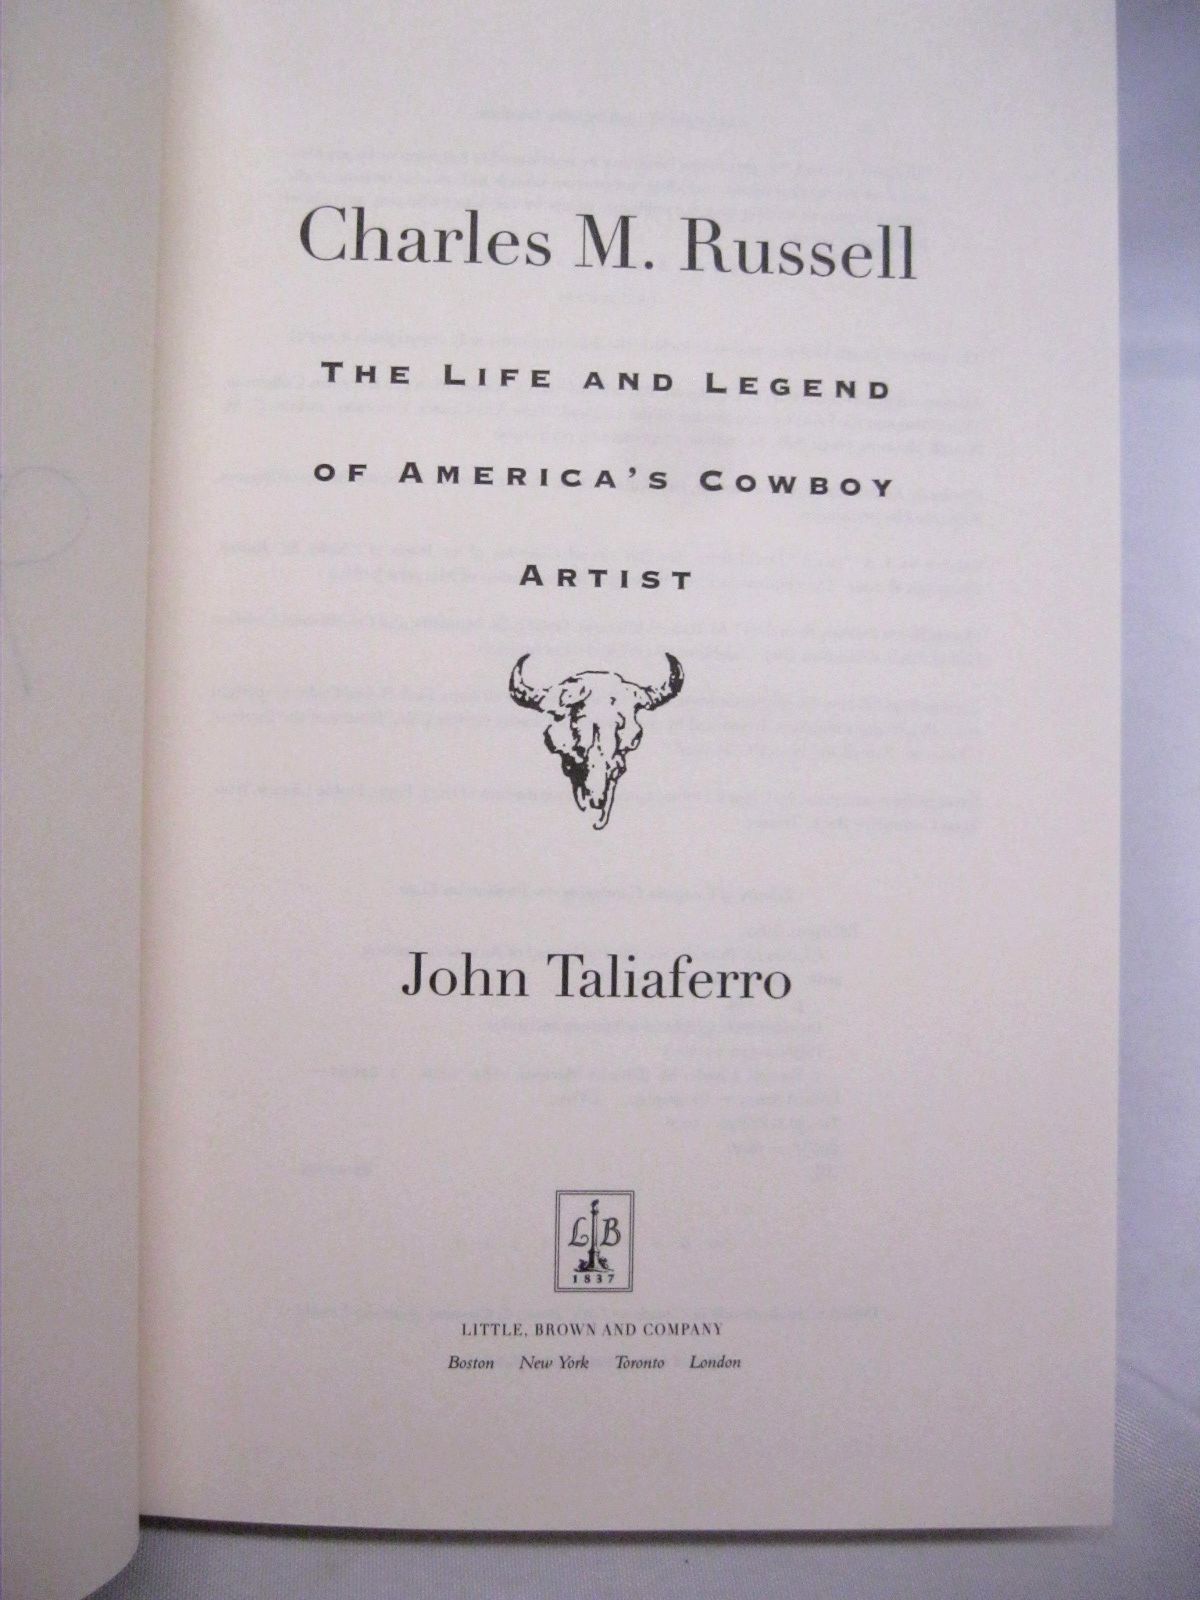 Charles M. Russell: The Life and Legend of America's Cowboy Artist by John Taliaferro